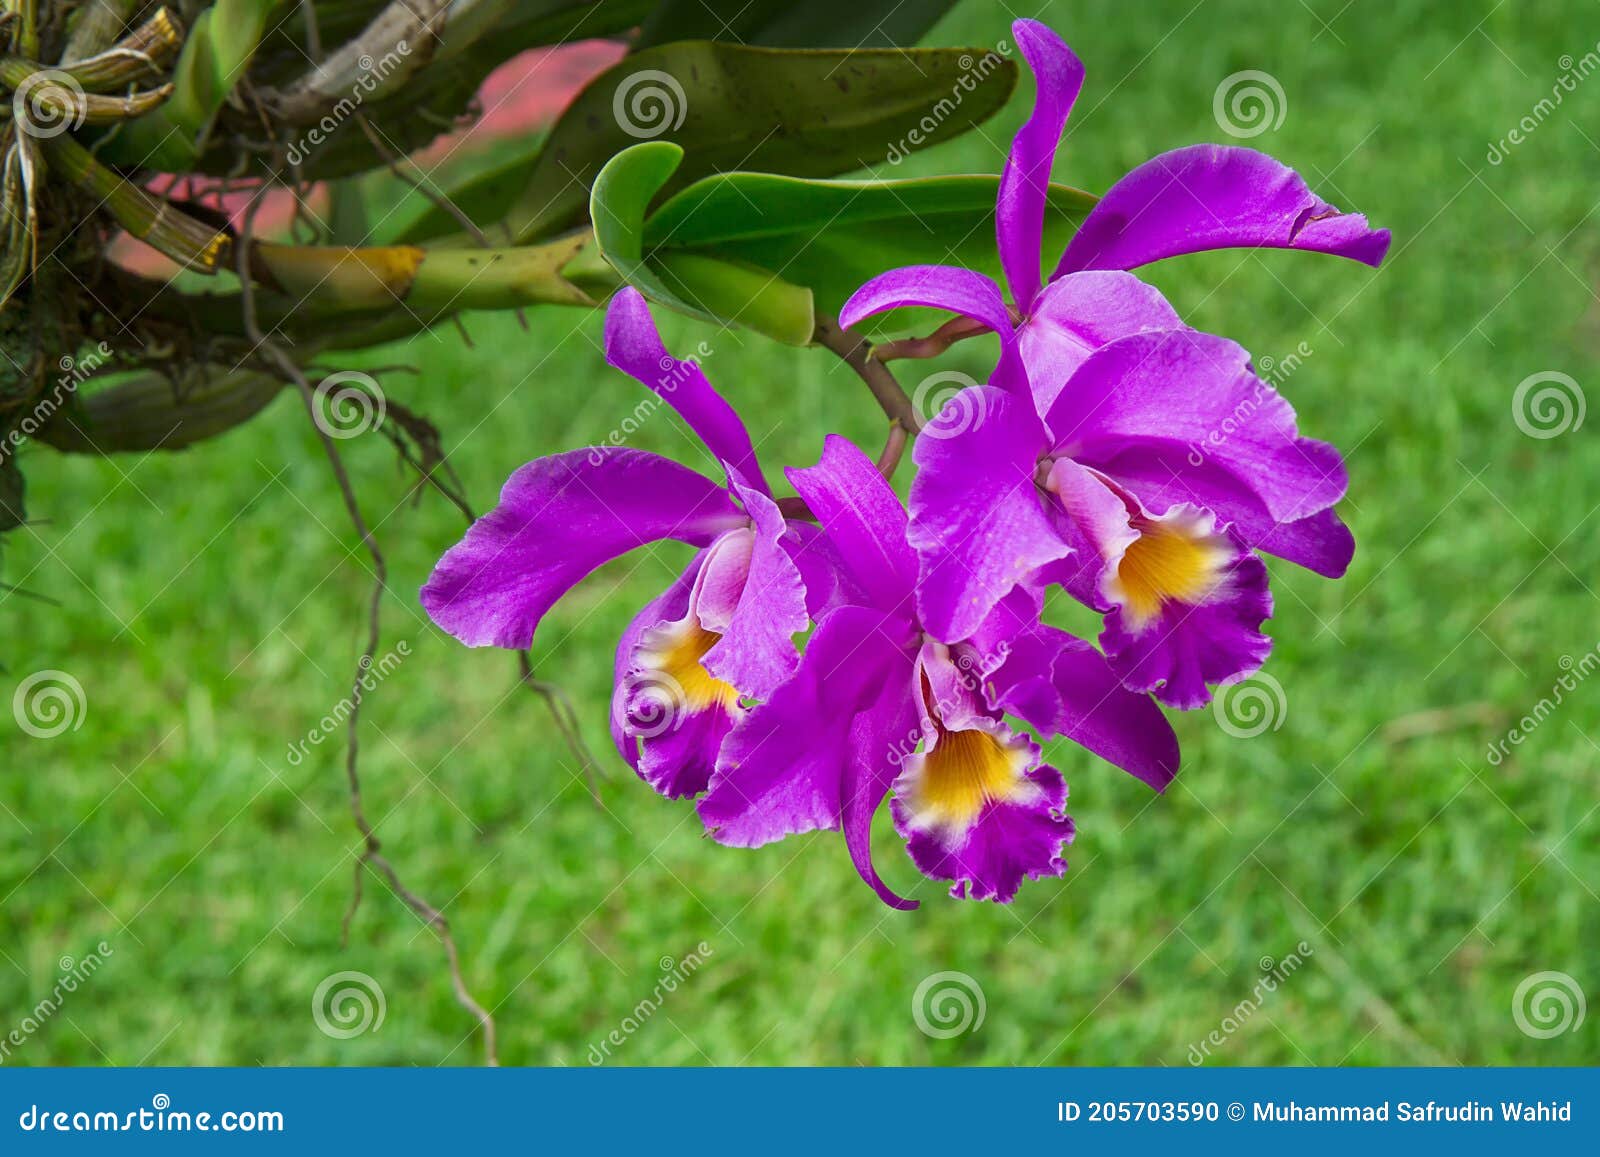 Cattleya Gaskelliana is a Labiate Cattleya Species of Orchid. Guarianthe is  a Colorful Purple Flowers Stock Photo - Image of spring, flora: 205703590